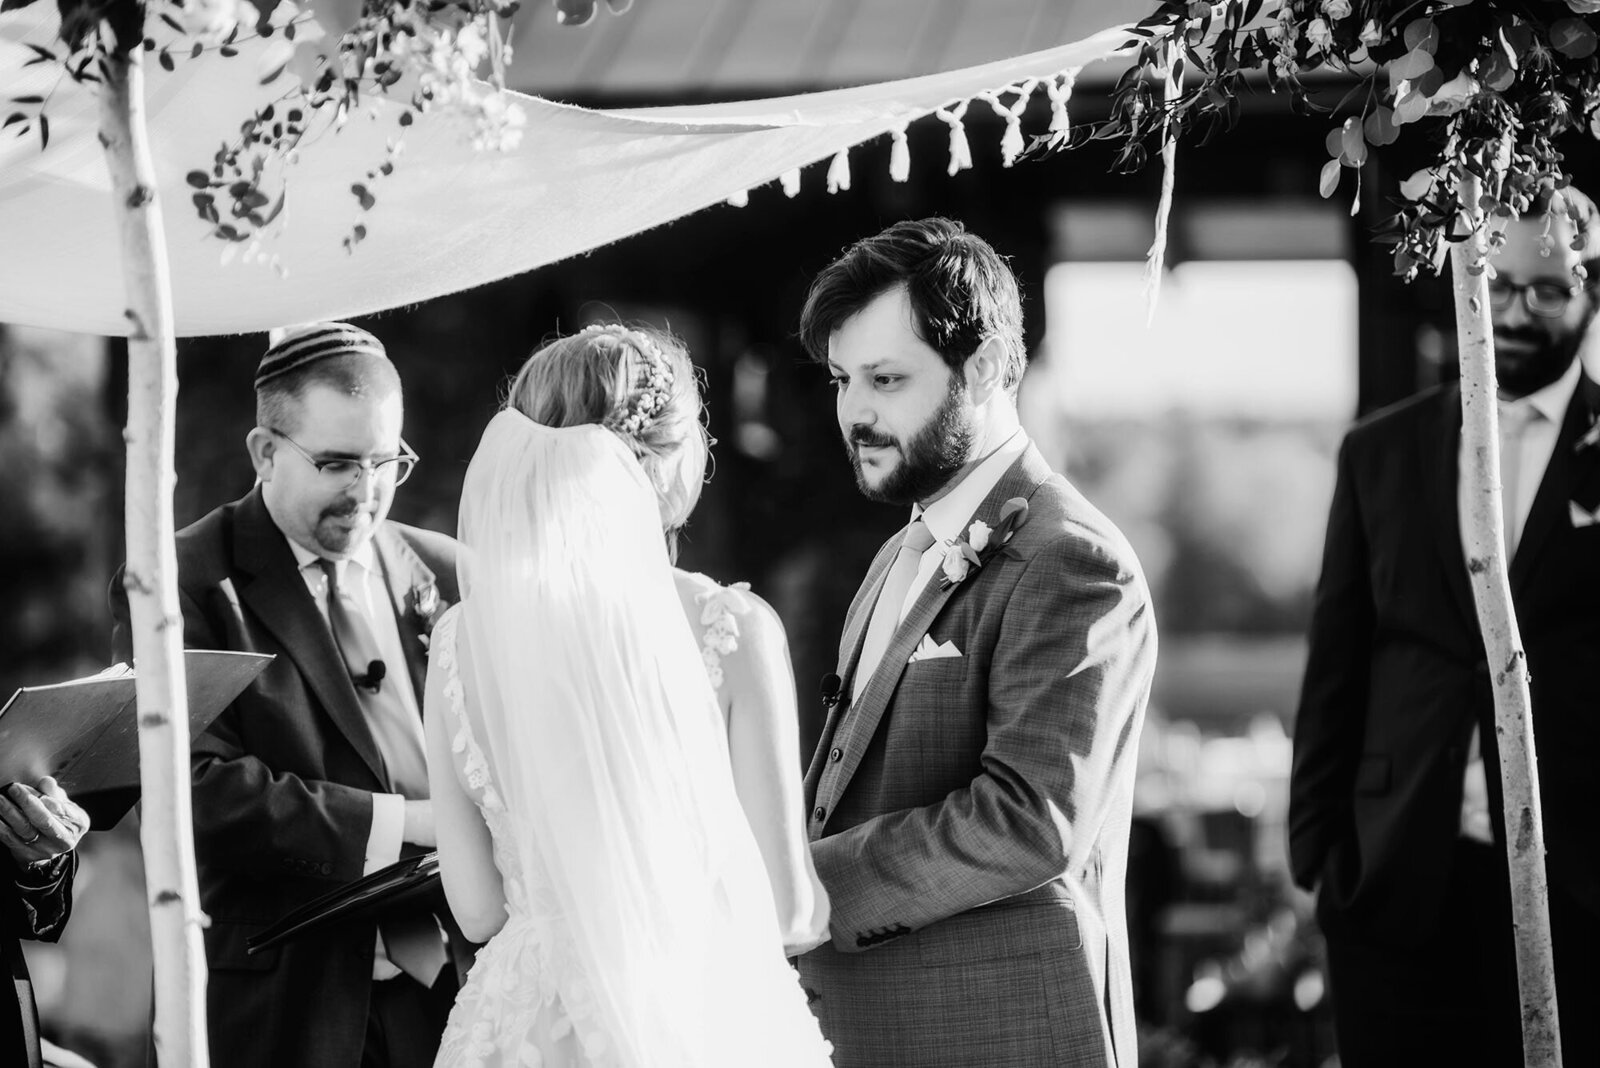 Micro Wedding Ceremony at Grove Park Inn in Asheville, NC.